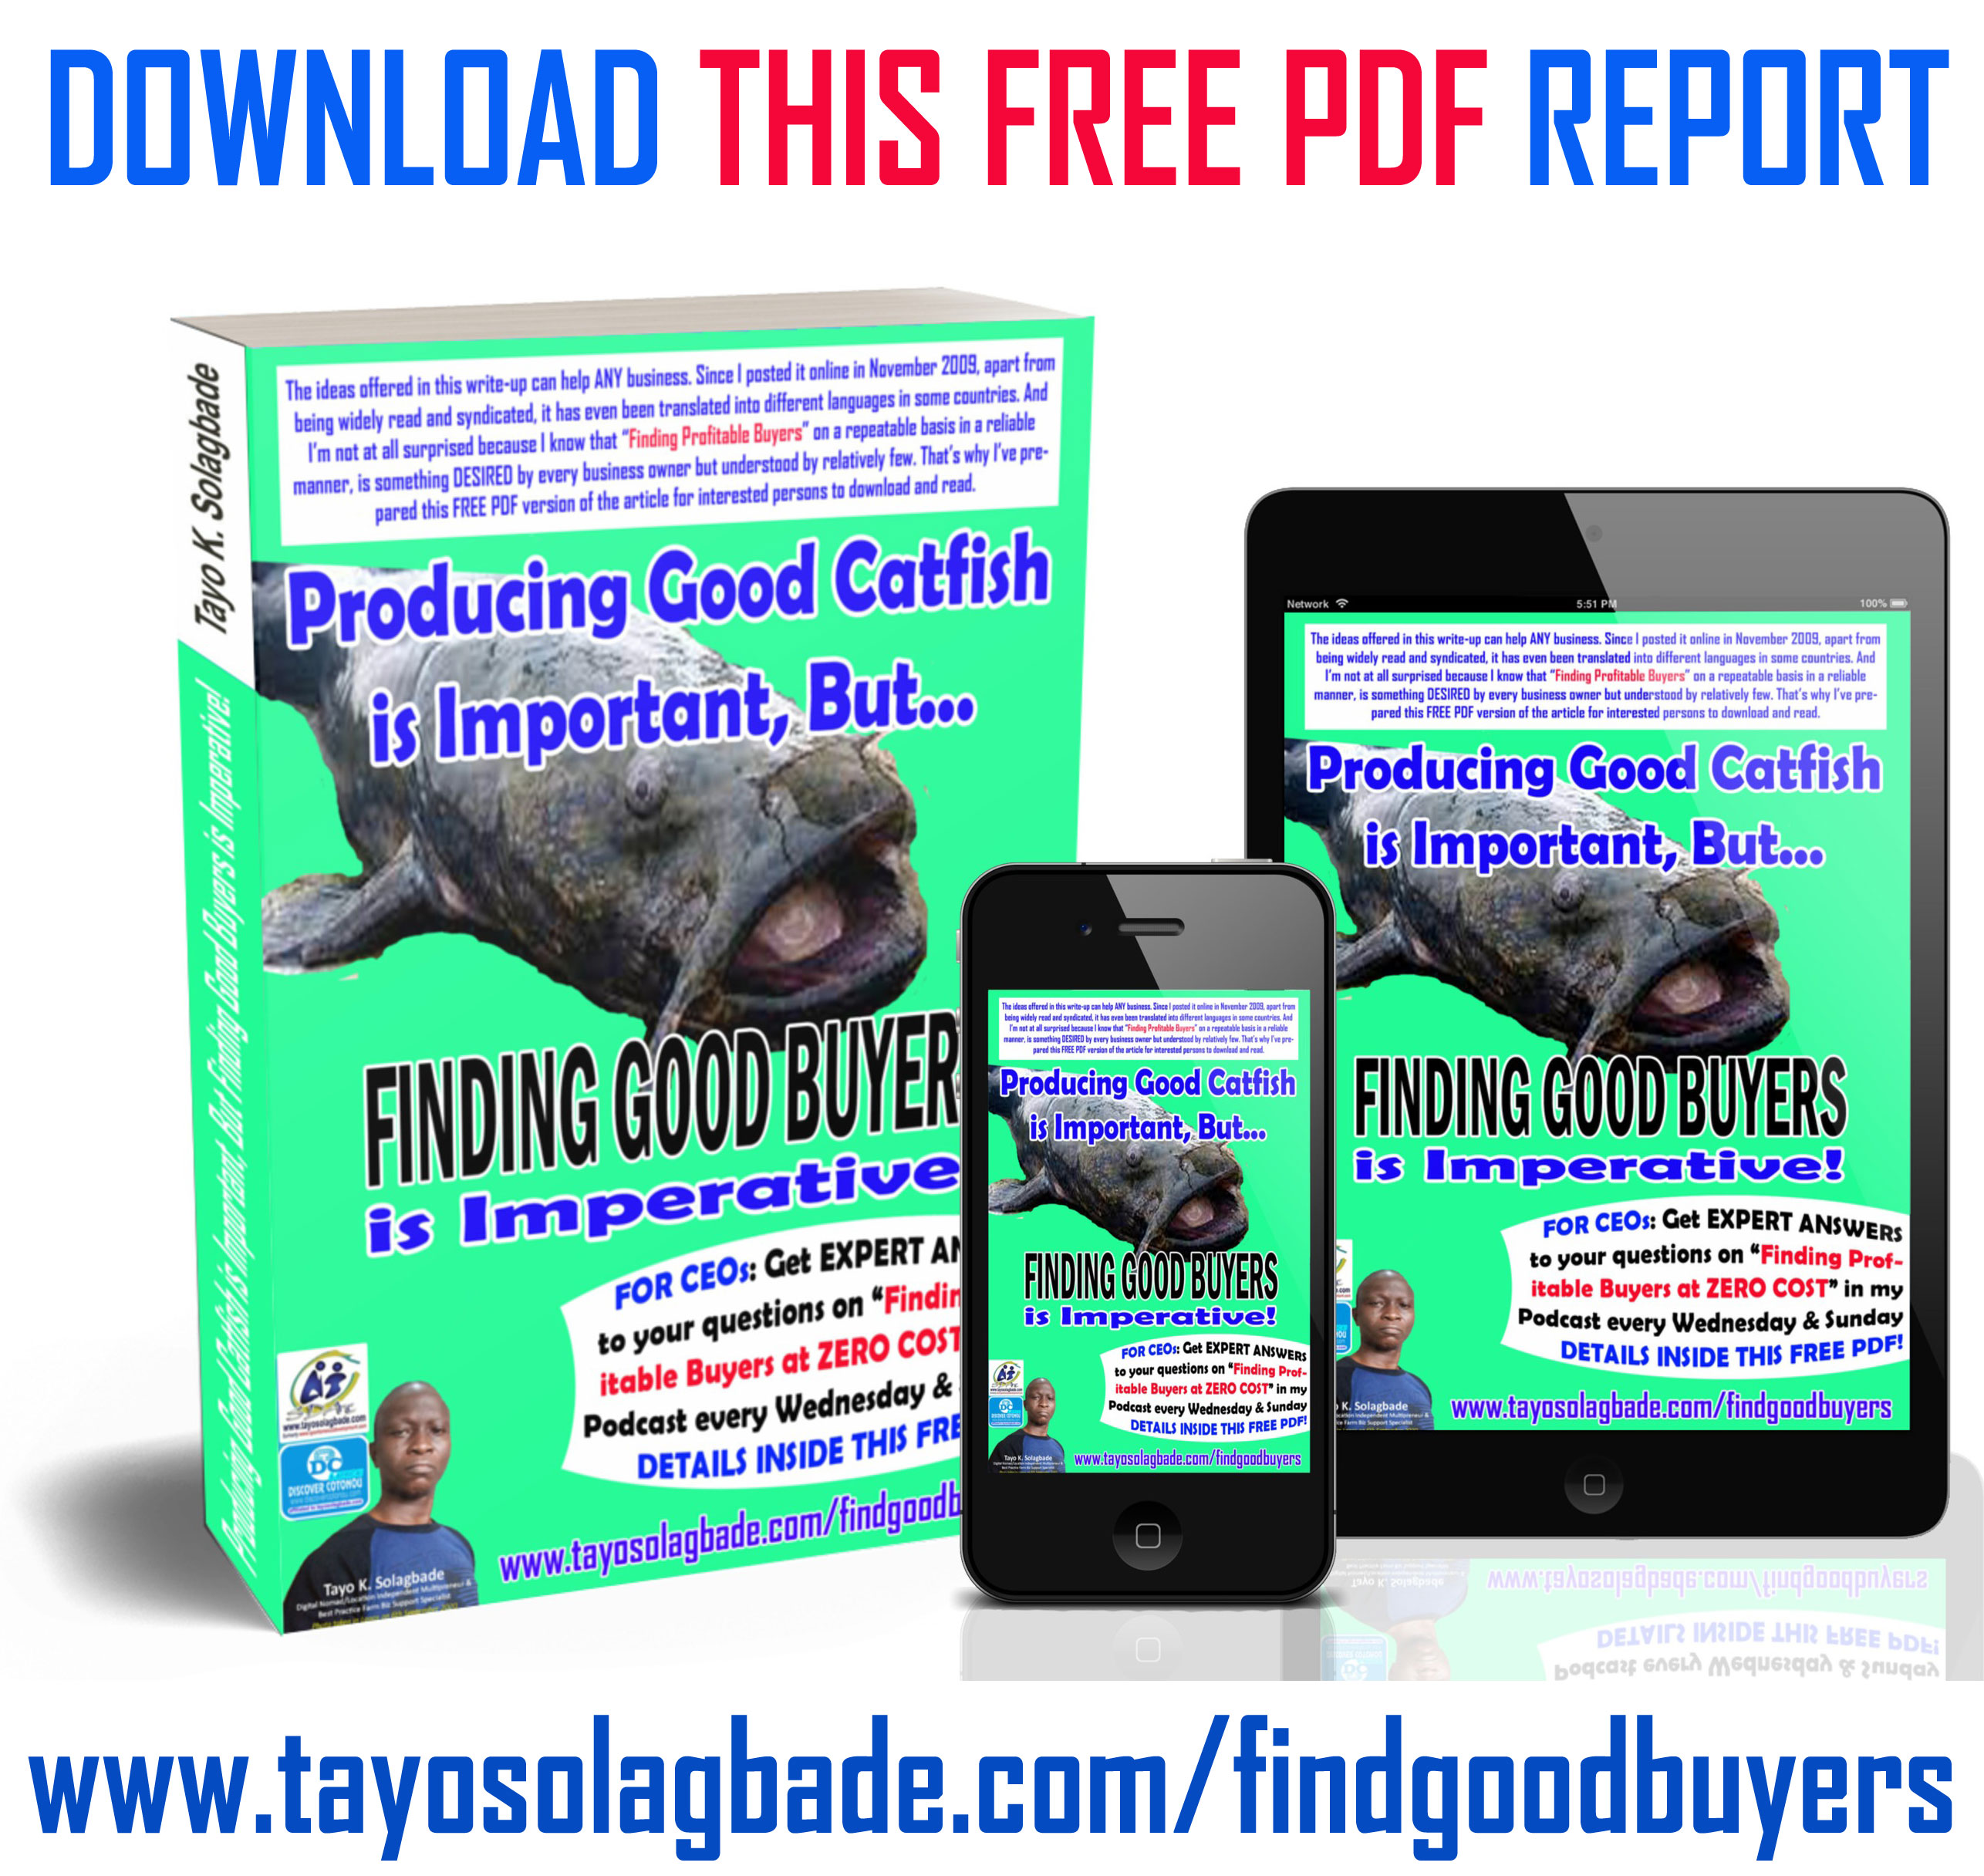 [PDF] Producing Good Catfish is Important, But Finding Good Buyers is Imperative! | Get ANSWERS TO YOUR QUESTIONS on “Finding Profitable Buyers at ZERO COST” for your products and services: